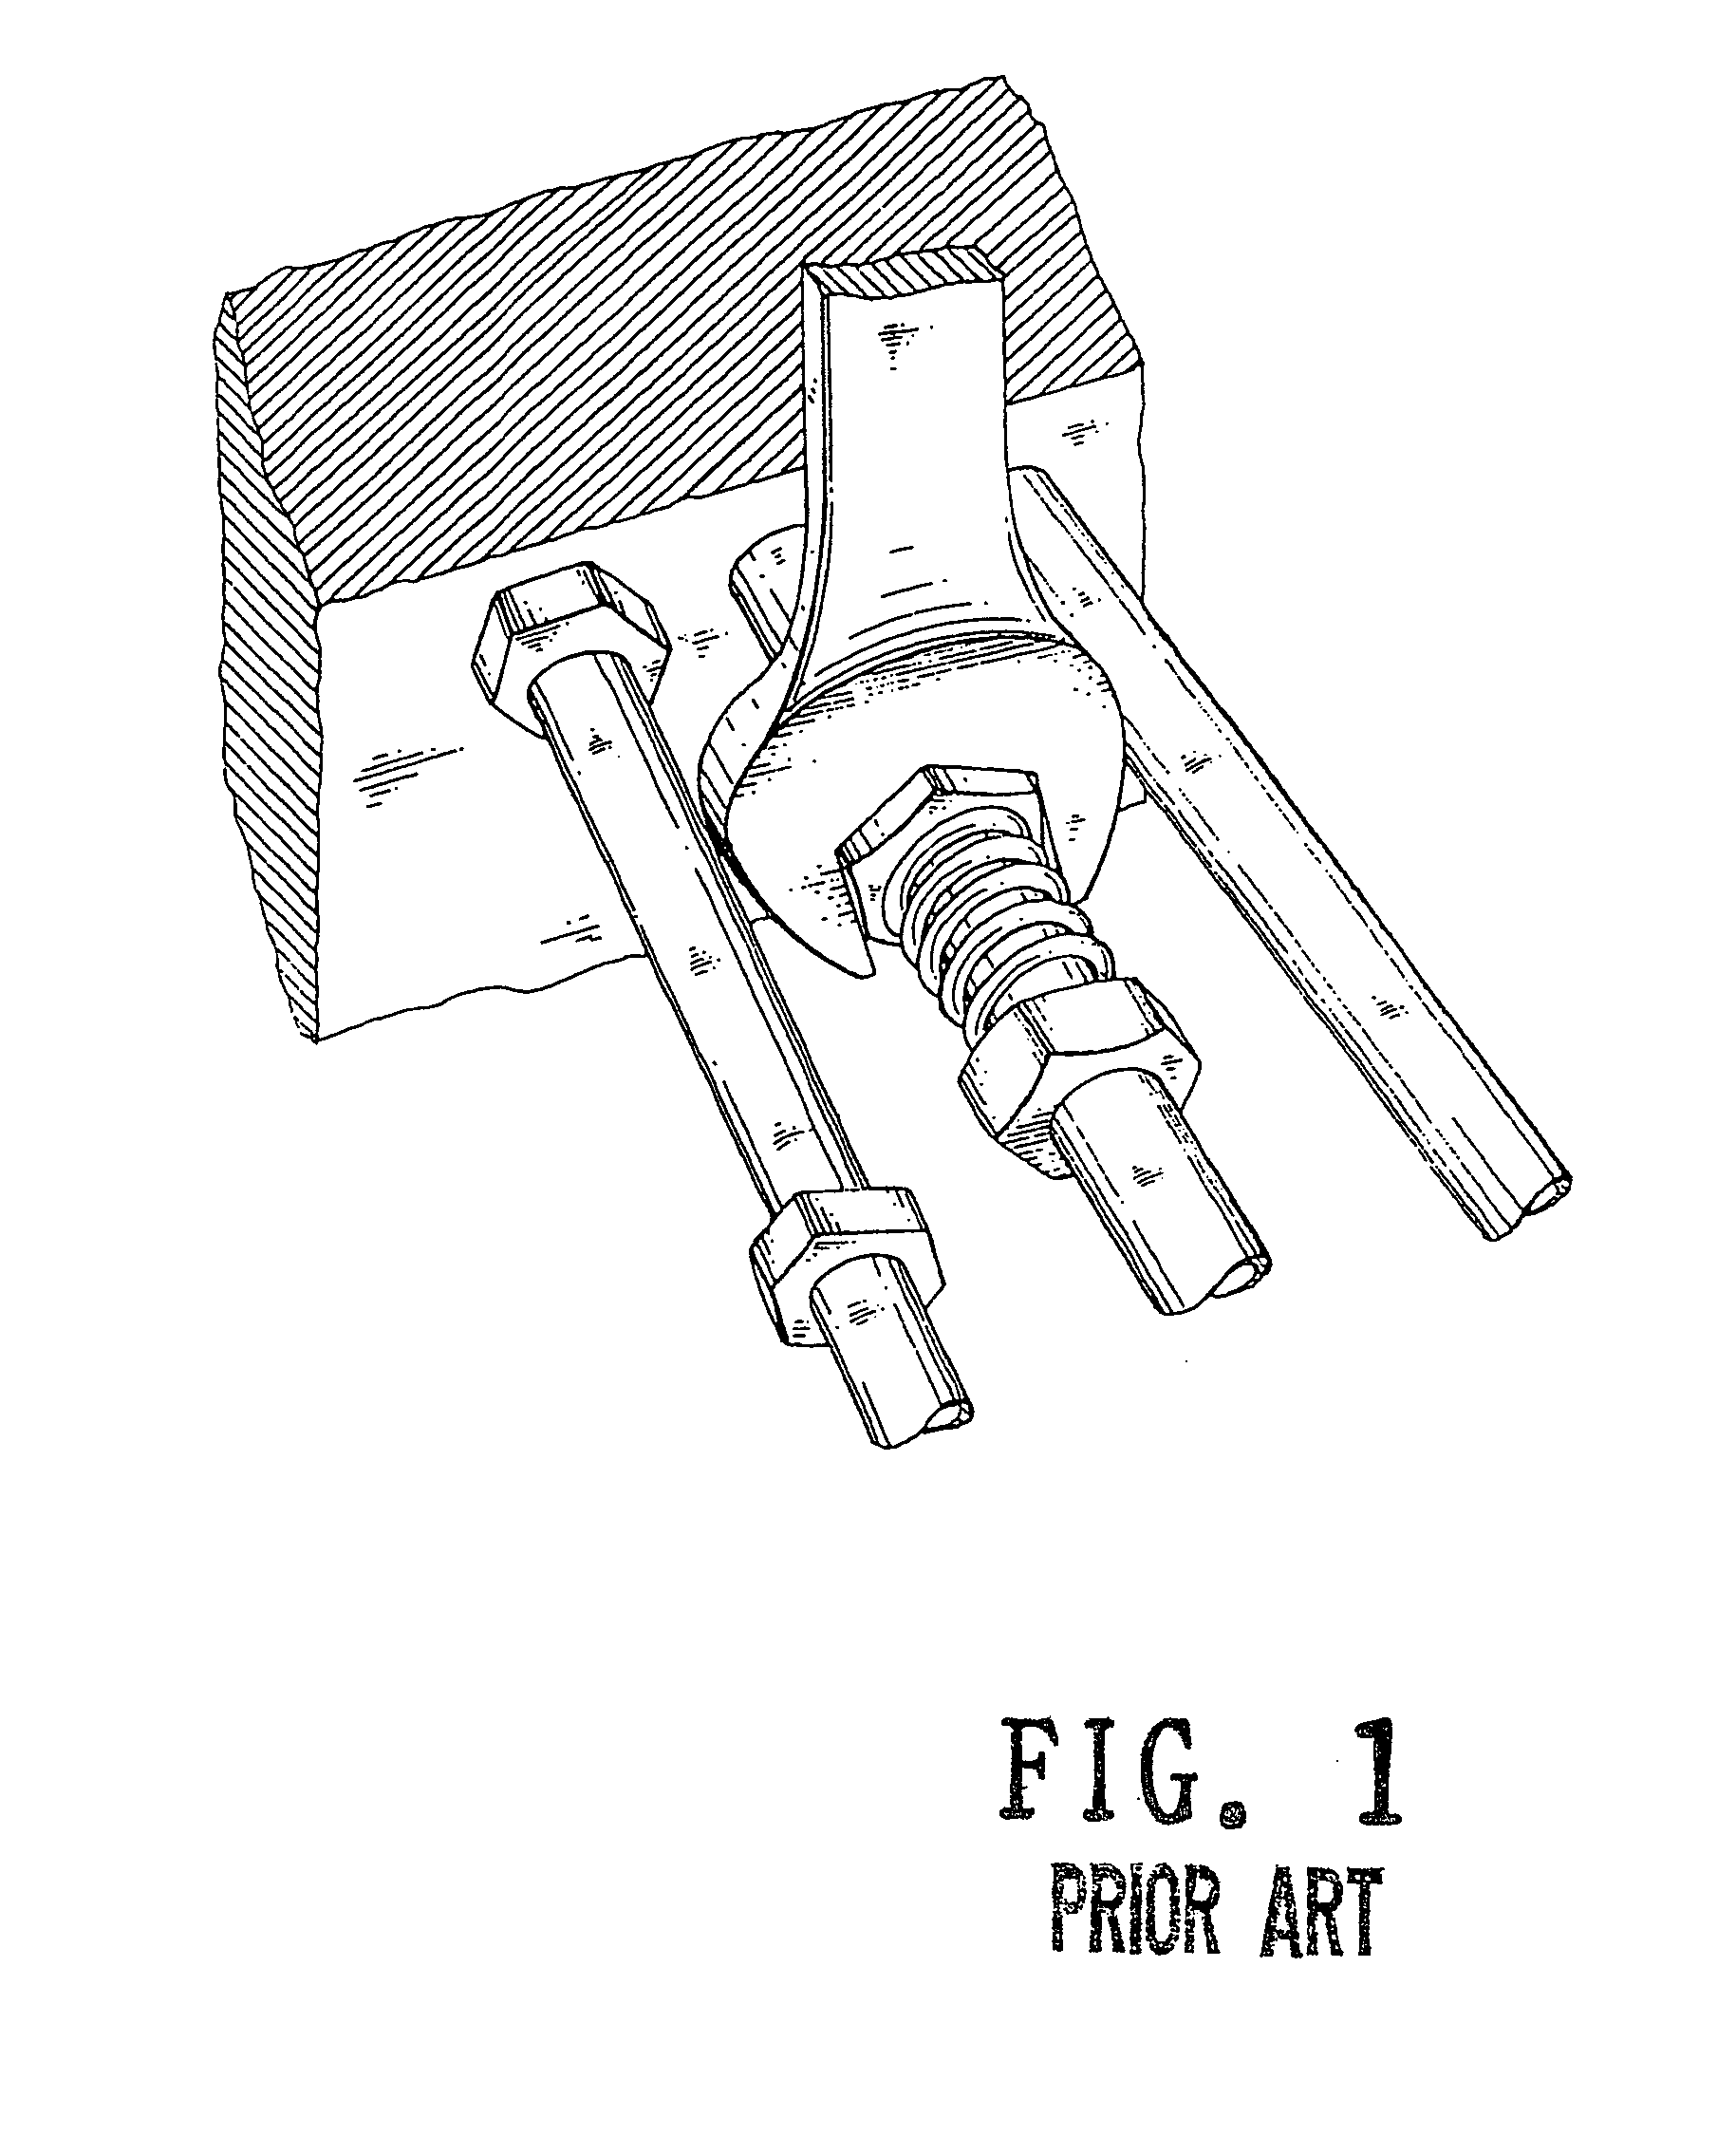 Pipe wrench having a fixed positioning ring